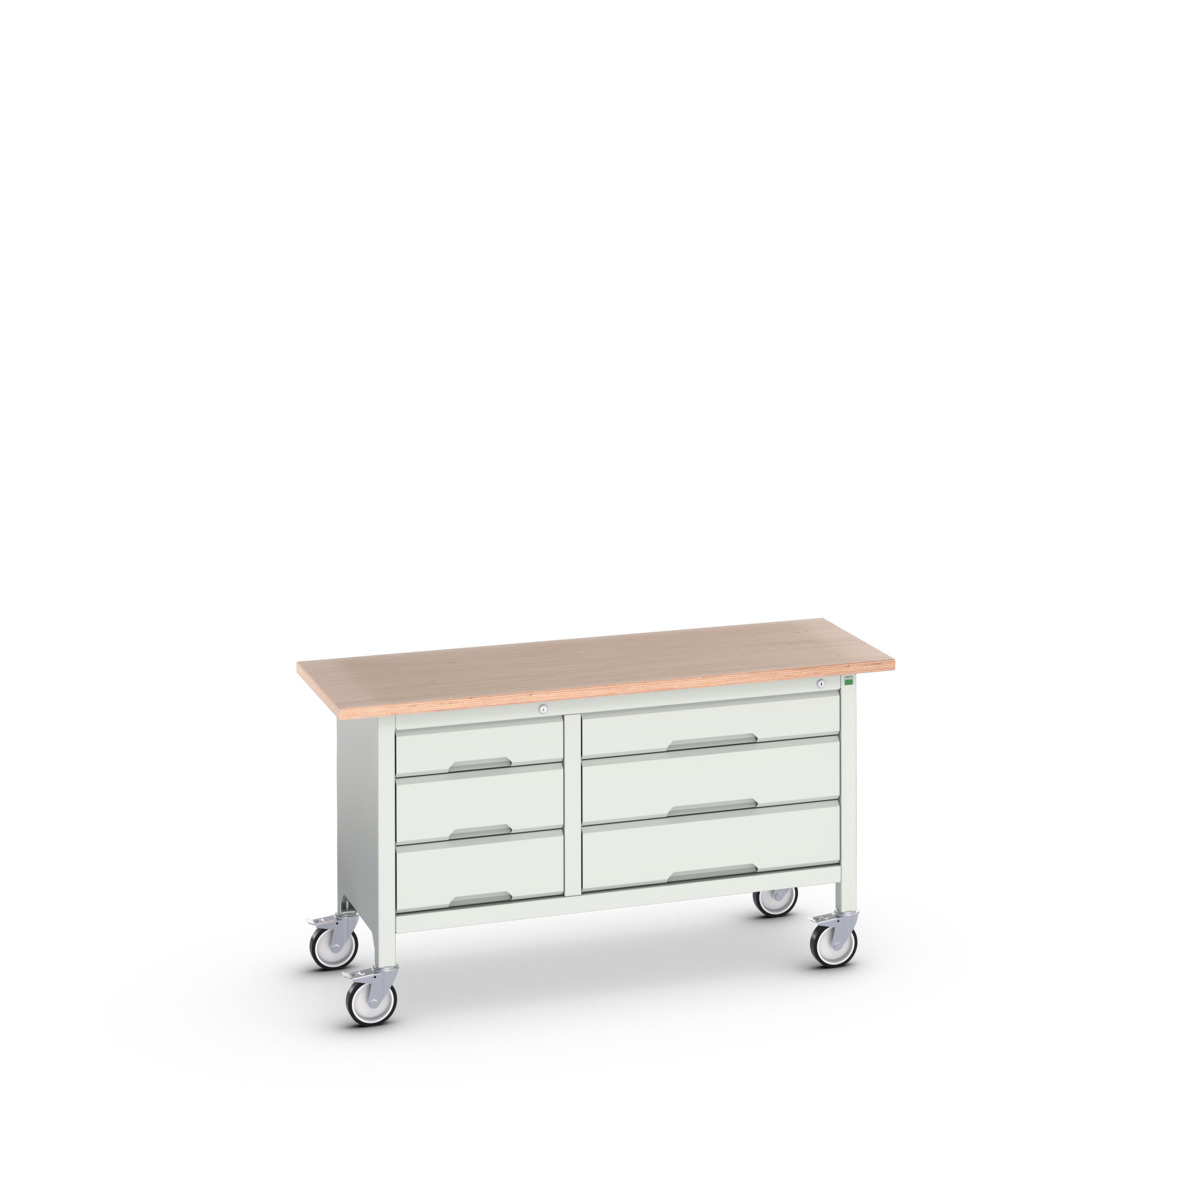 16923215.16 - verso mobile storage bench (mpx)